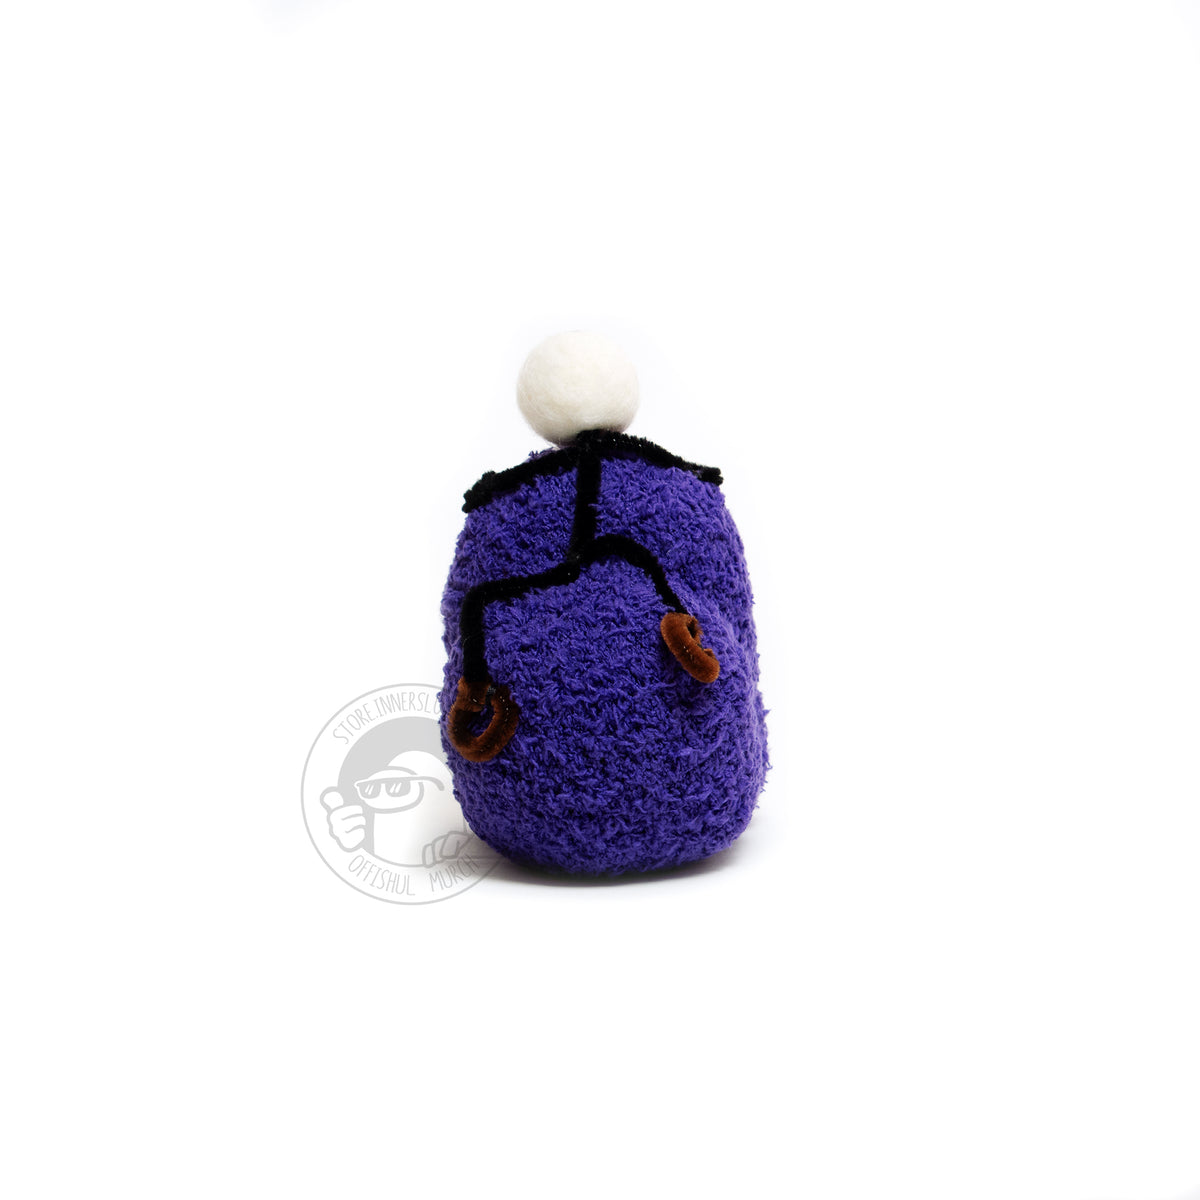 A back-view product photograph of the Purple Crewmate plush and Henry Stickmin figure on top of its head.